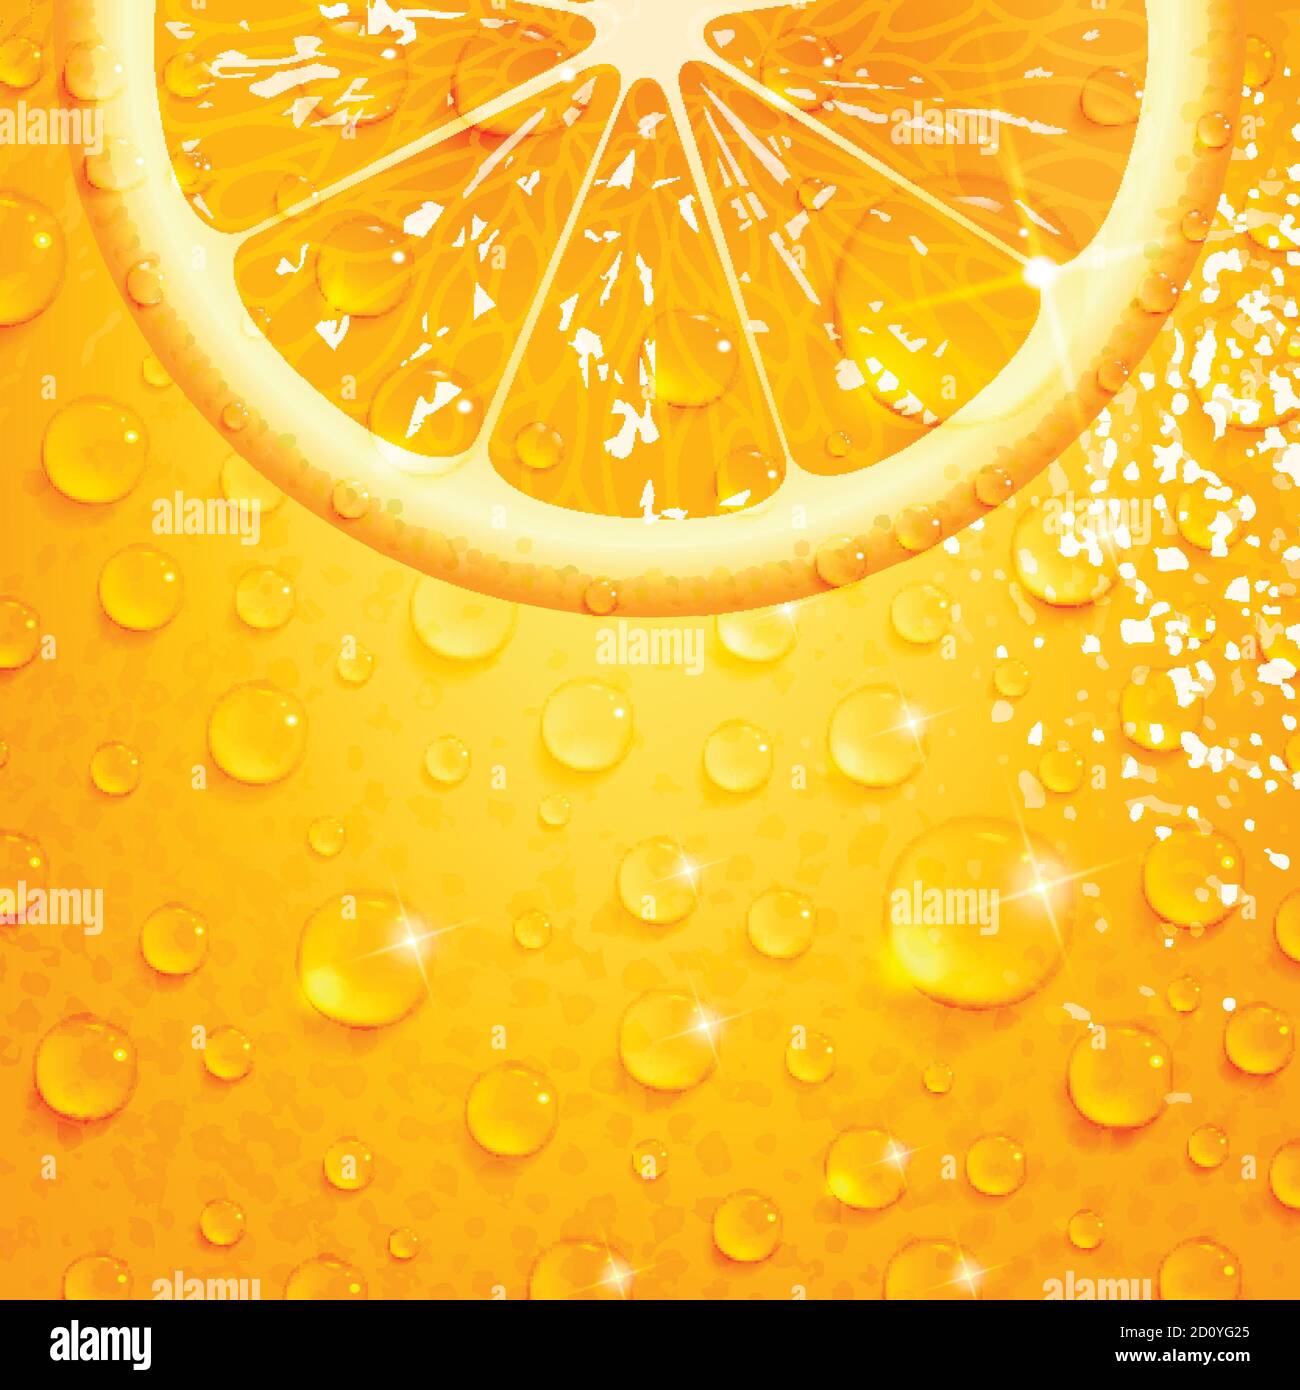 refreshing orange on a background of orange peel with drops of water Stock Vector